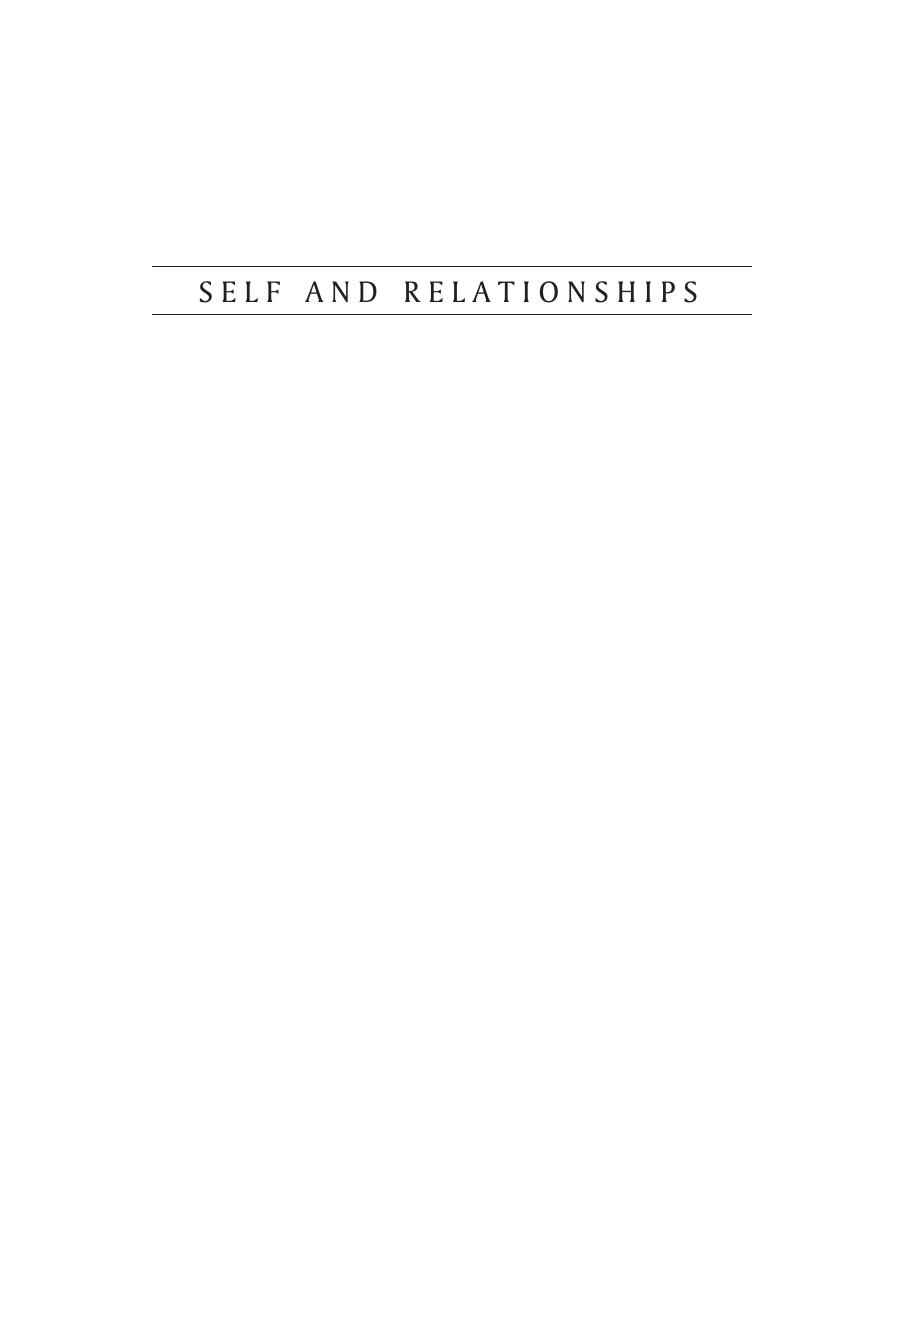 Self and Relationships : Connecting Intrapersonal and Interpersonal Processes by Vohs Kathleen D.(Editor)